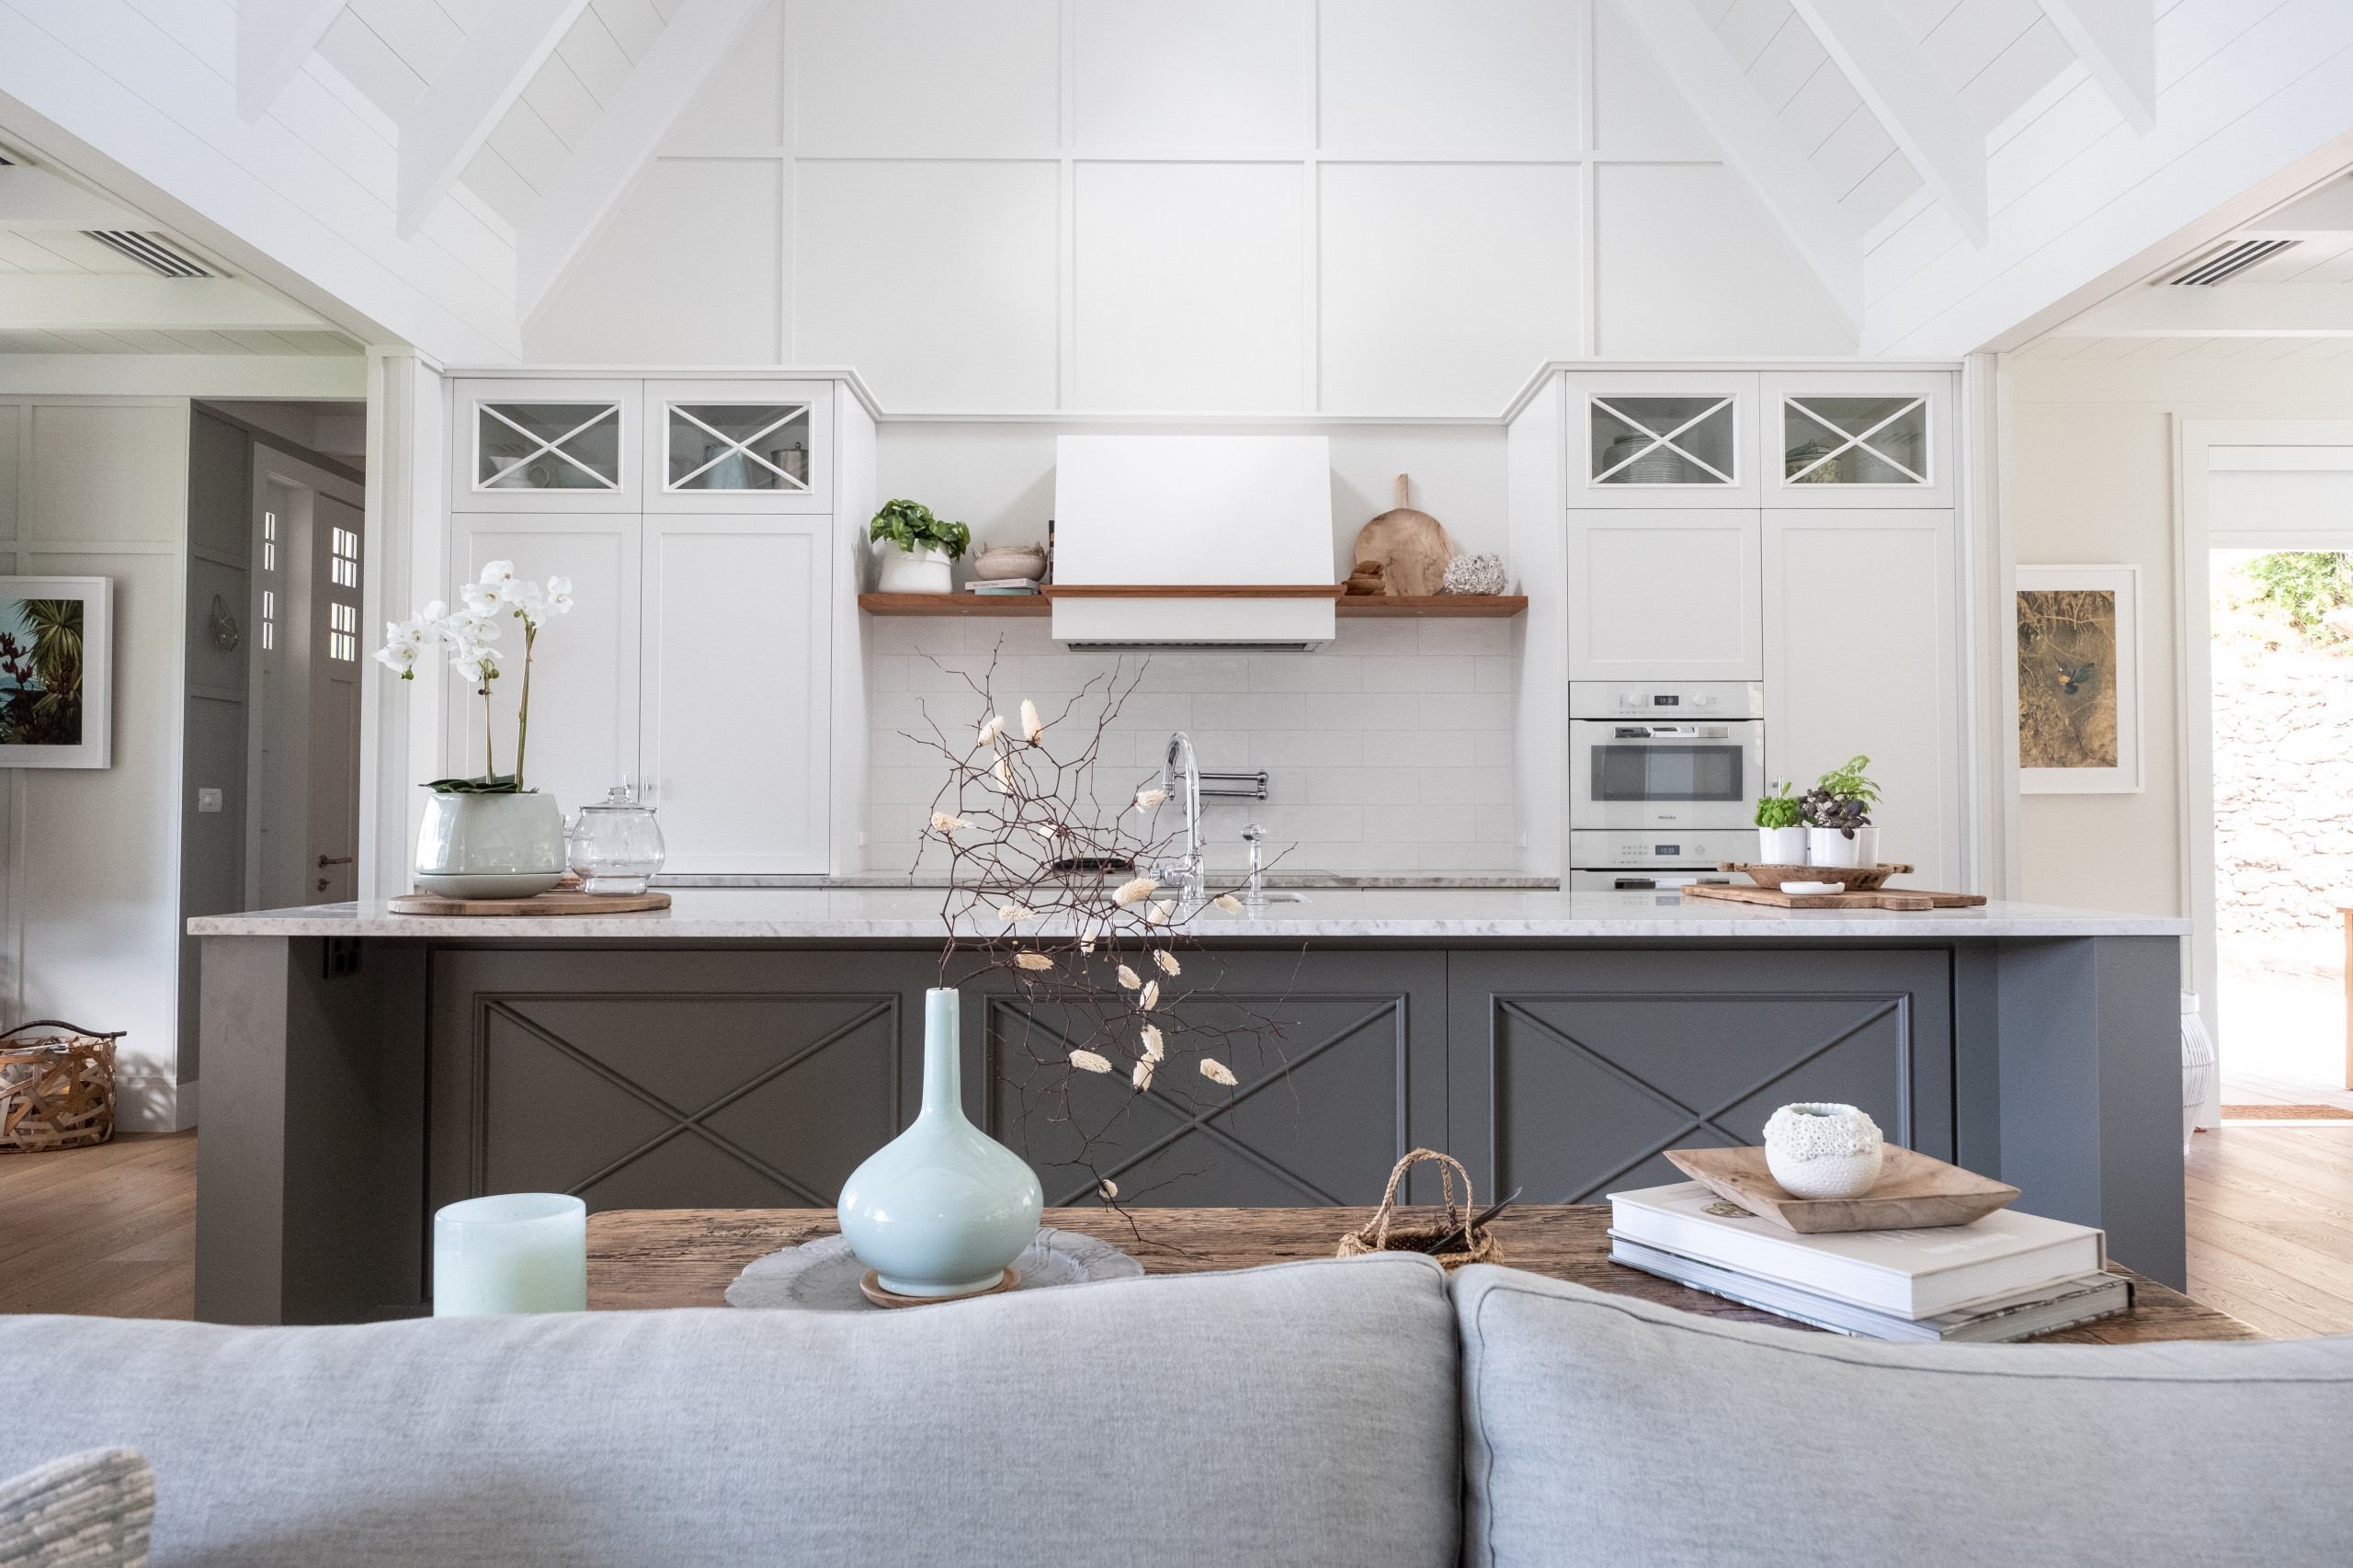 18 Vaulted Ceiling Kitchen Ideas You'll Love   August, 18   Houzz